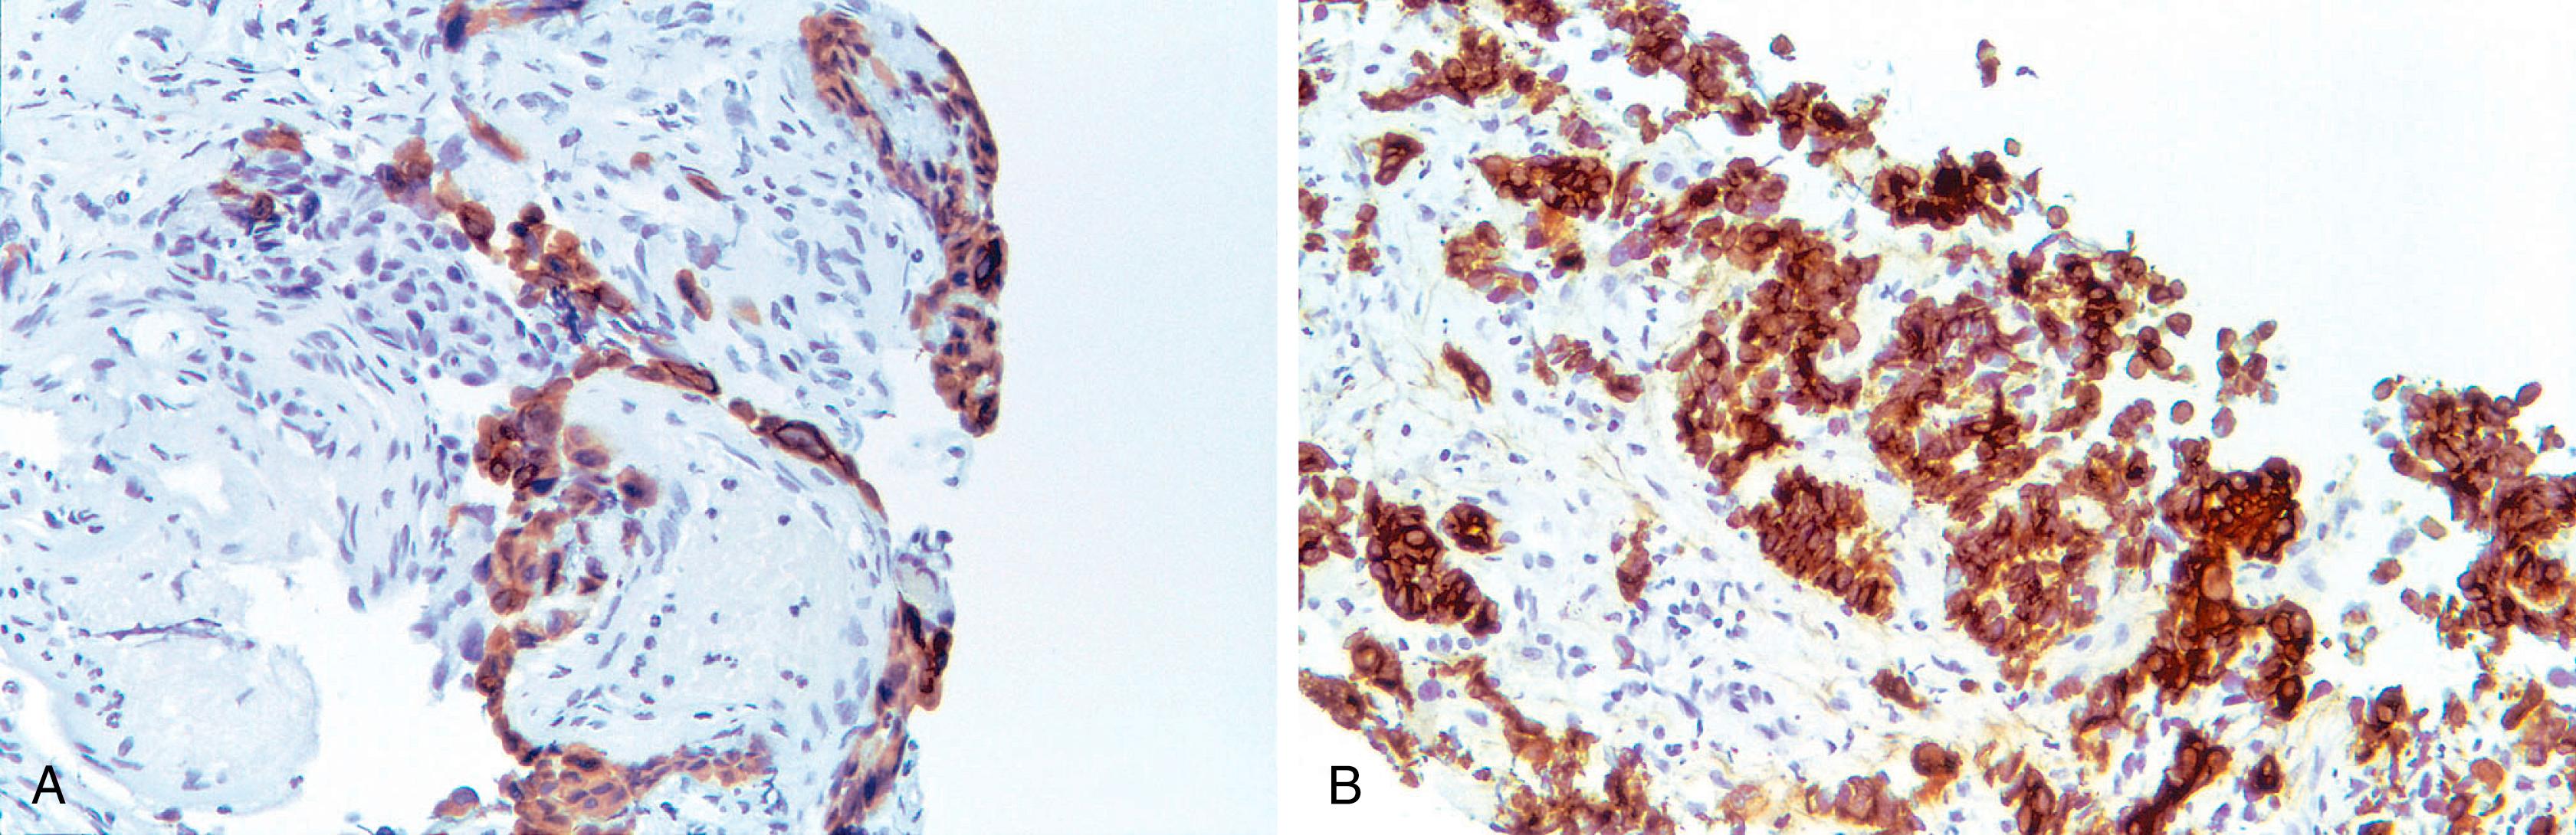 Fig. 8.8, Antibodies to CK5/CK6 strongly immunostain reactive mesothelial cells in a pleural biopsy (A) and epithelioid mesothelioma cells (B).